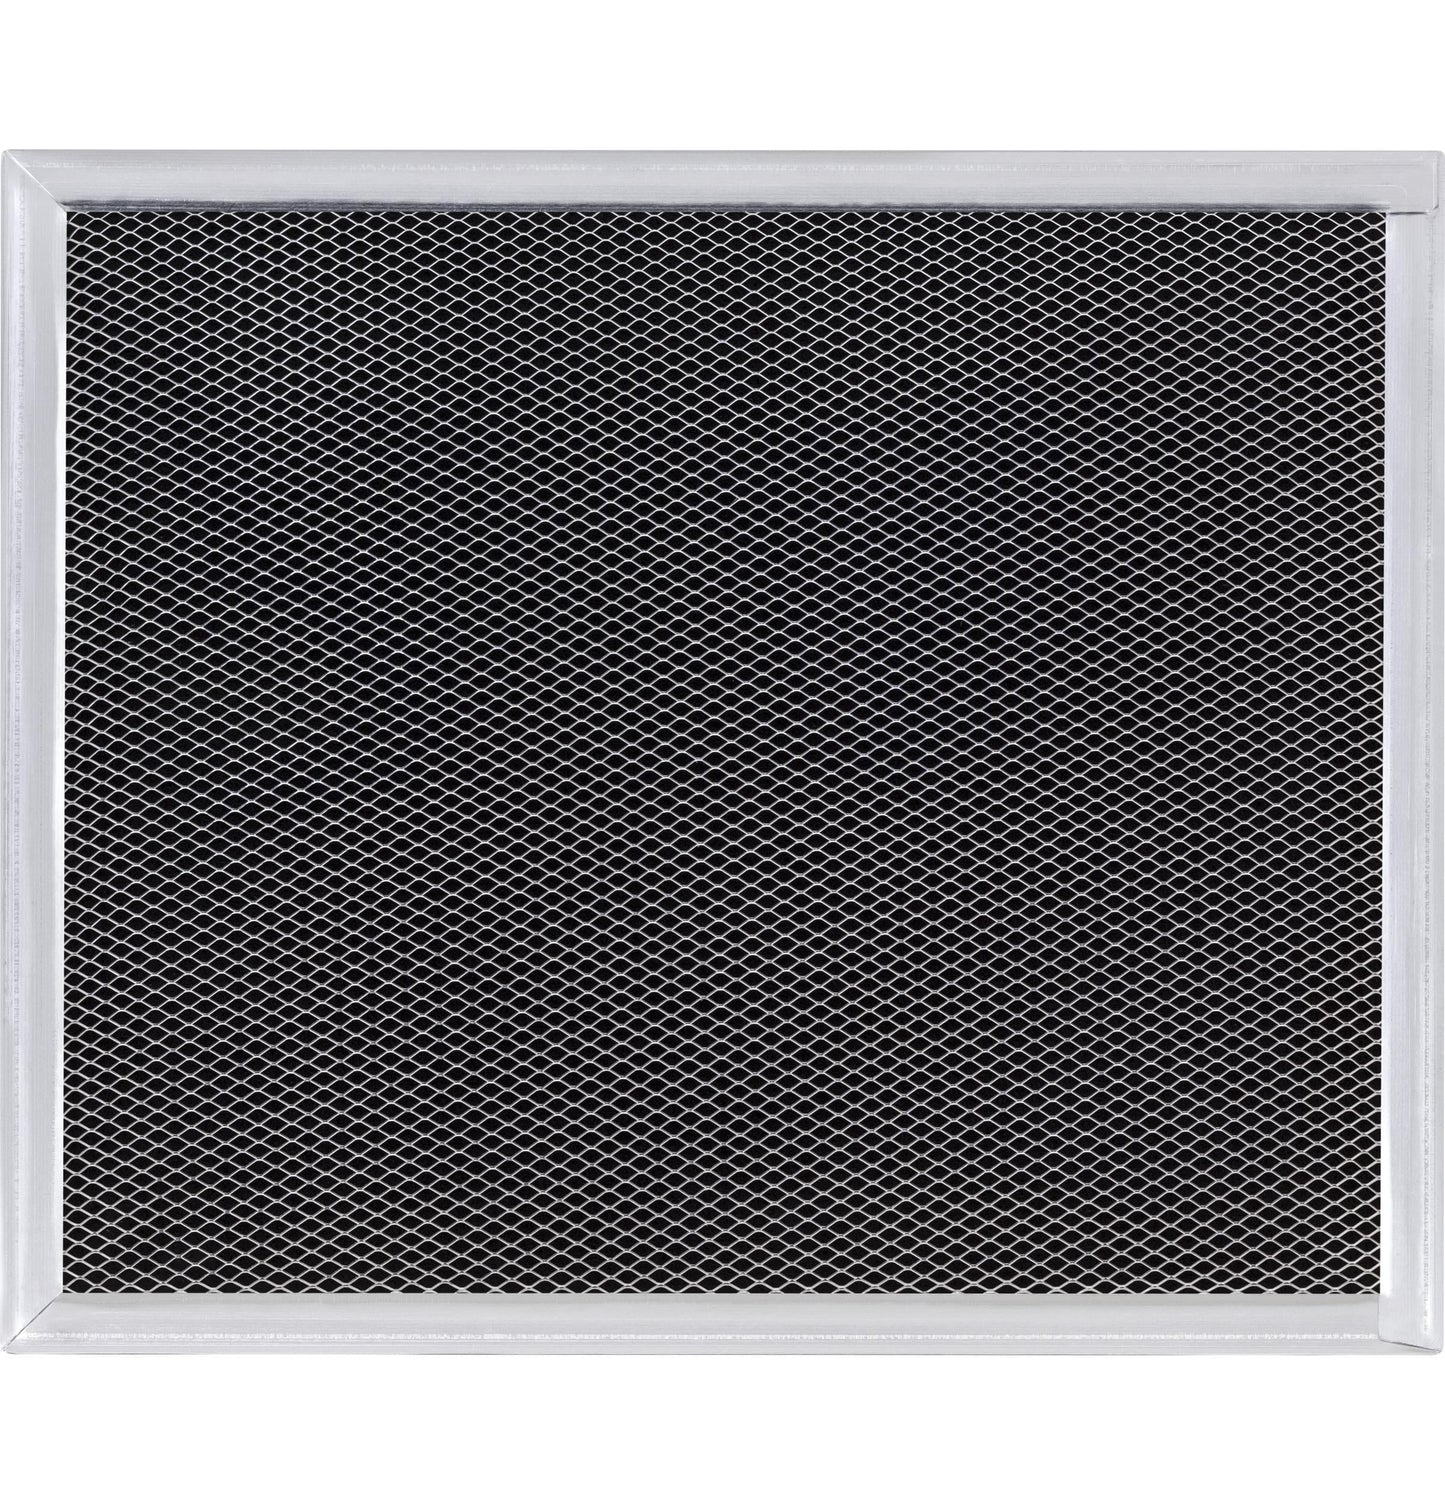 Ge Appliances JXCF53 Charcoal Filter